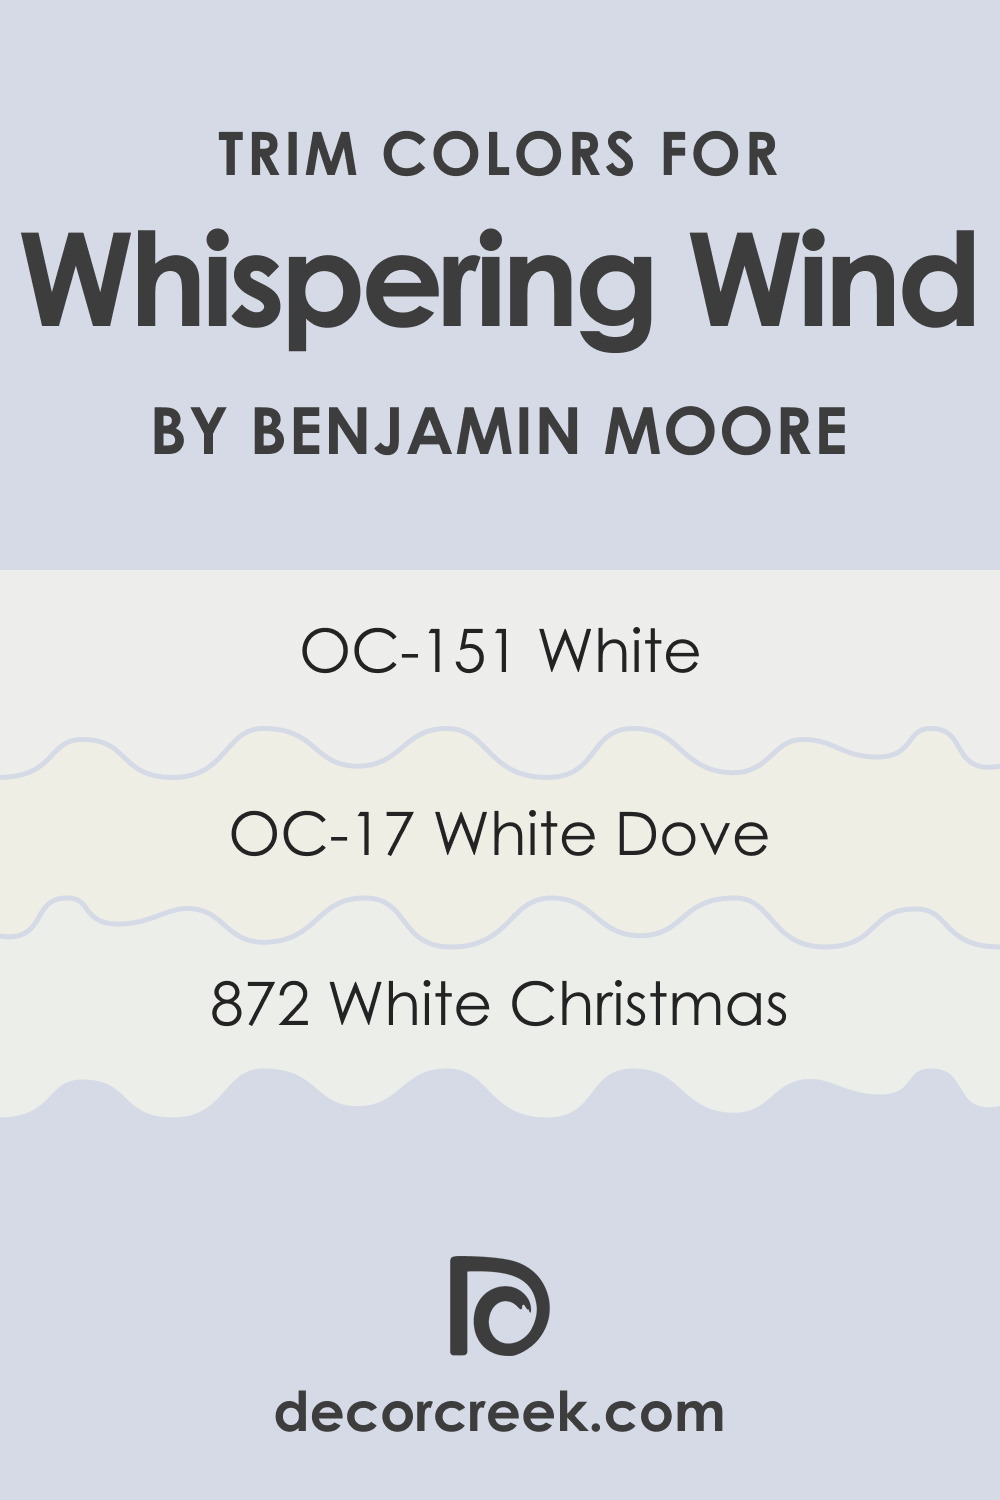 Trim Colors of Whispering Wind 1416